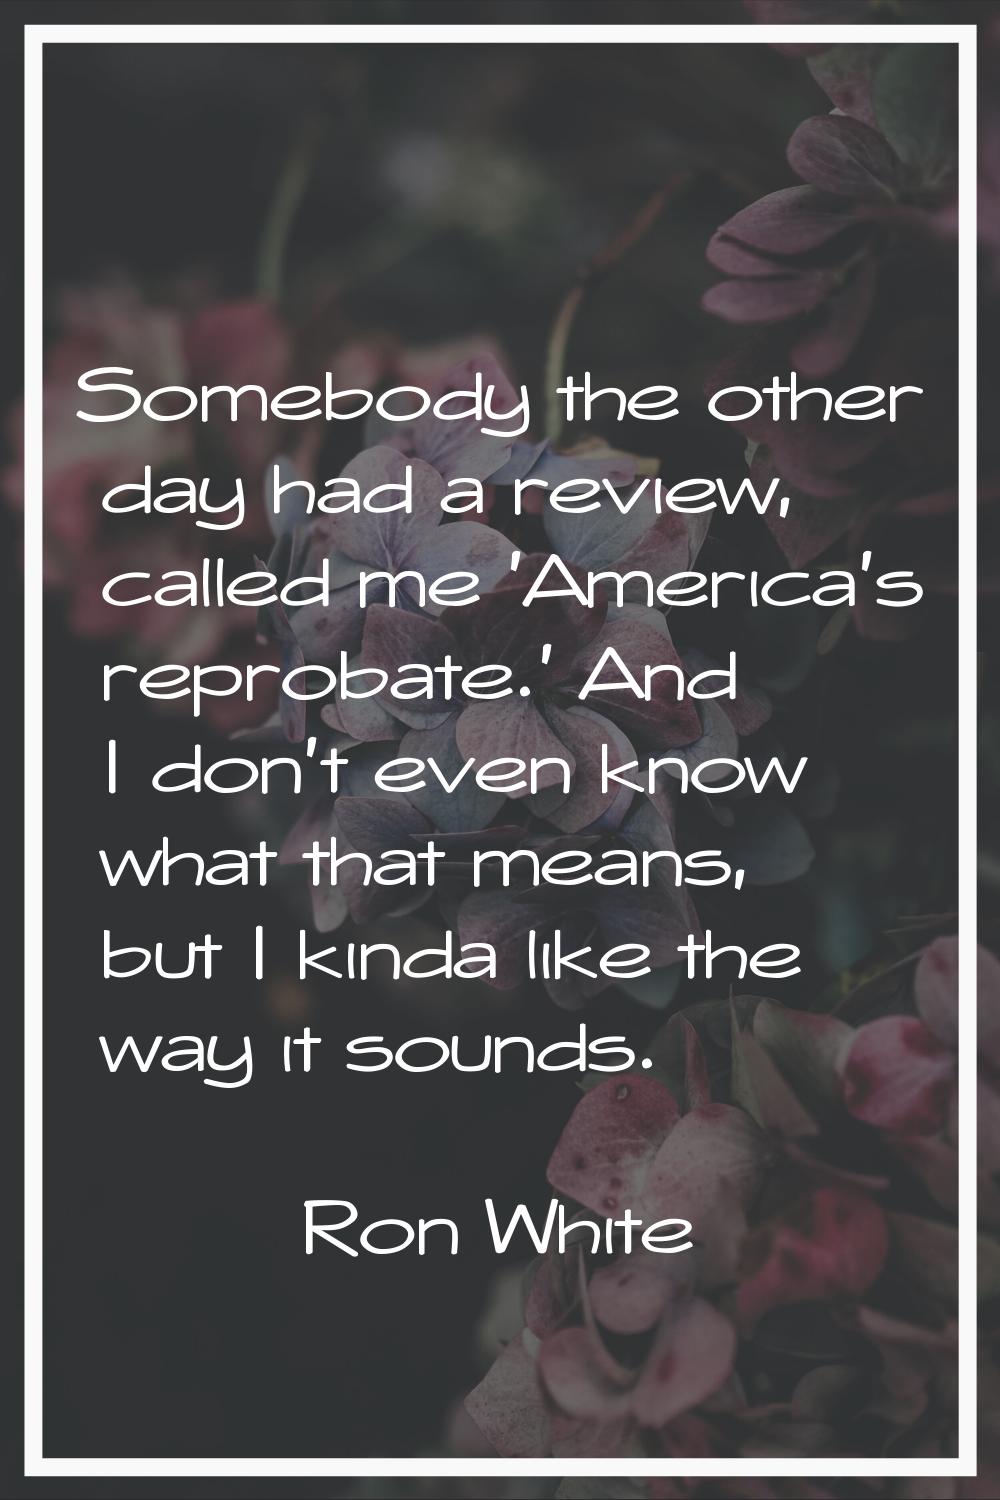 Somebody the other day had a review, called me 'America's reprobate.' And I don't even know what th